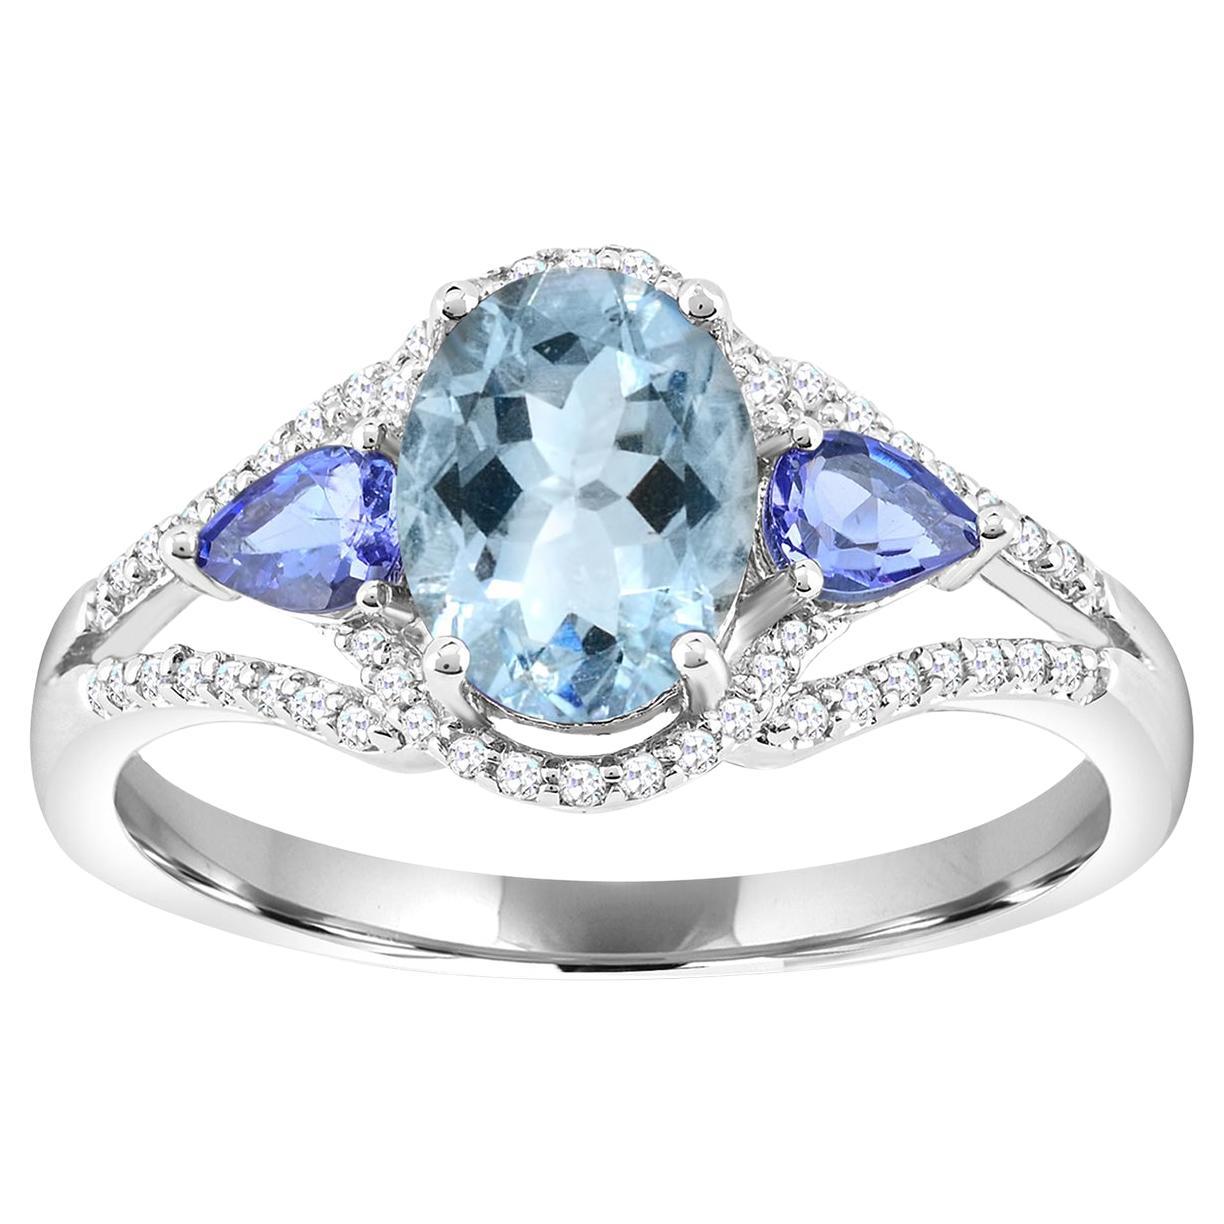 1-5/8 ct. Aquamarine and Tanzanite with Diamond Accent Sterling Silver Ring 